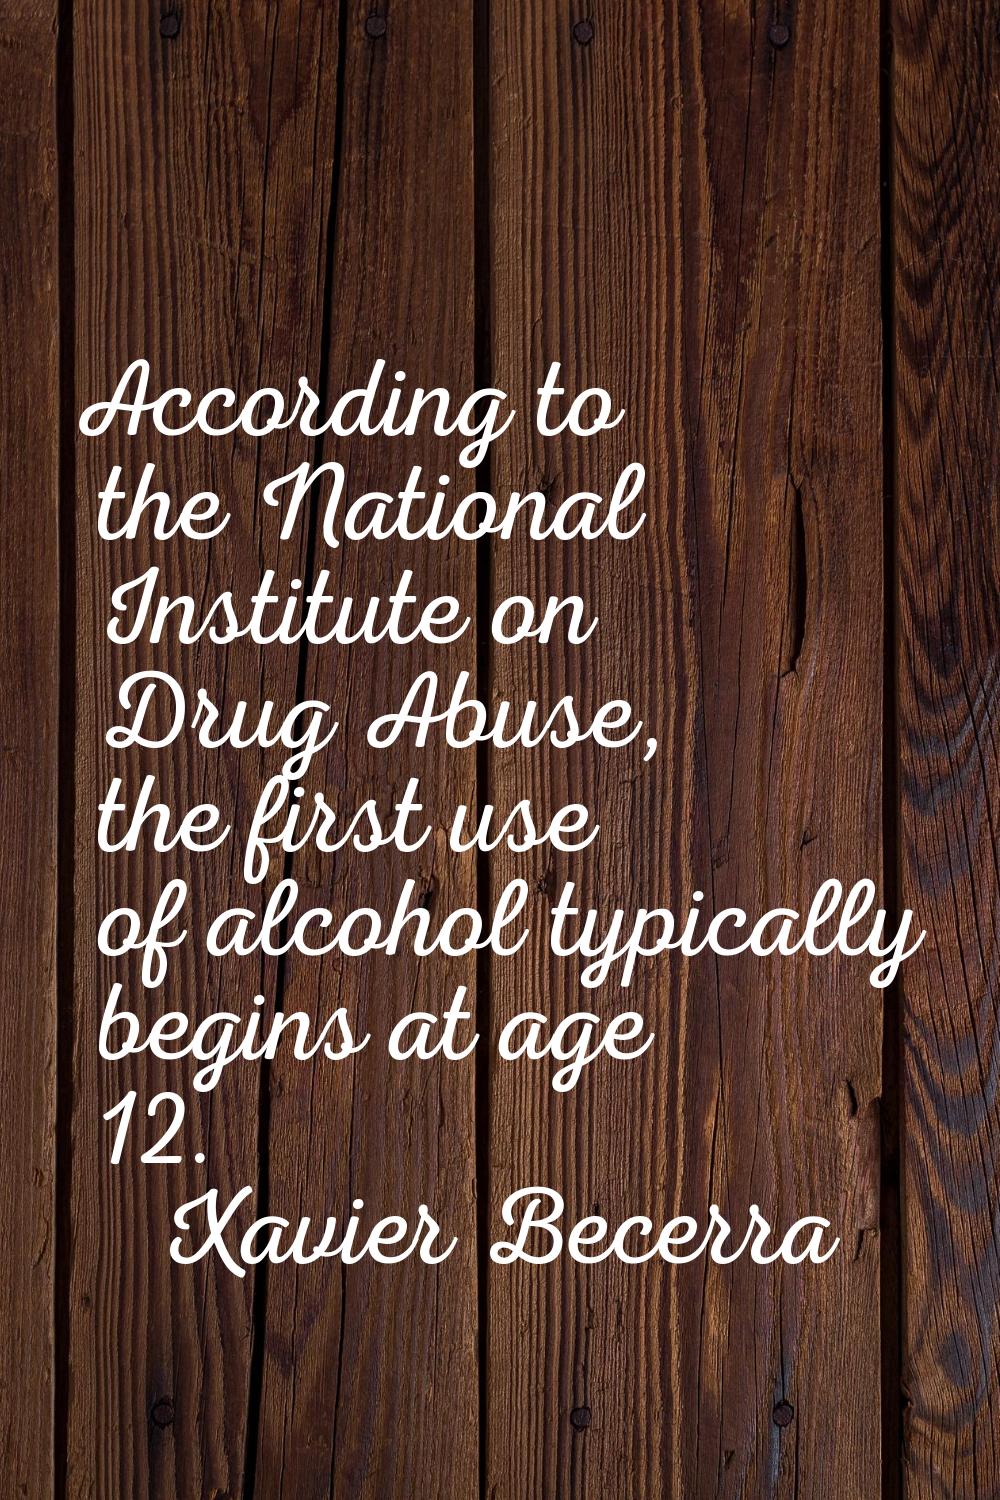 According to the National Institute on Drug Abuse, the first use of alcohol typically begins at age